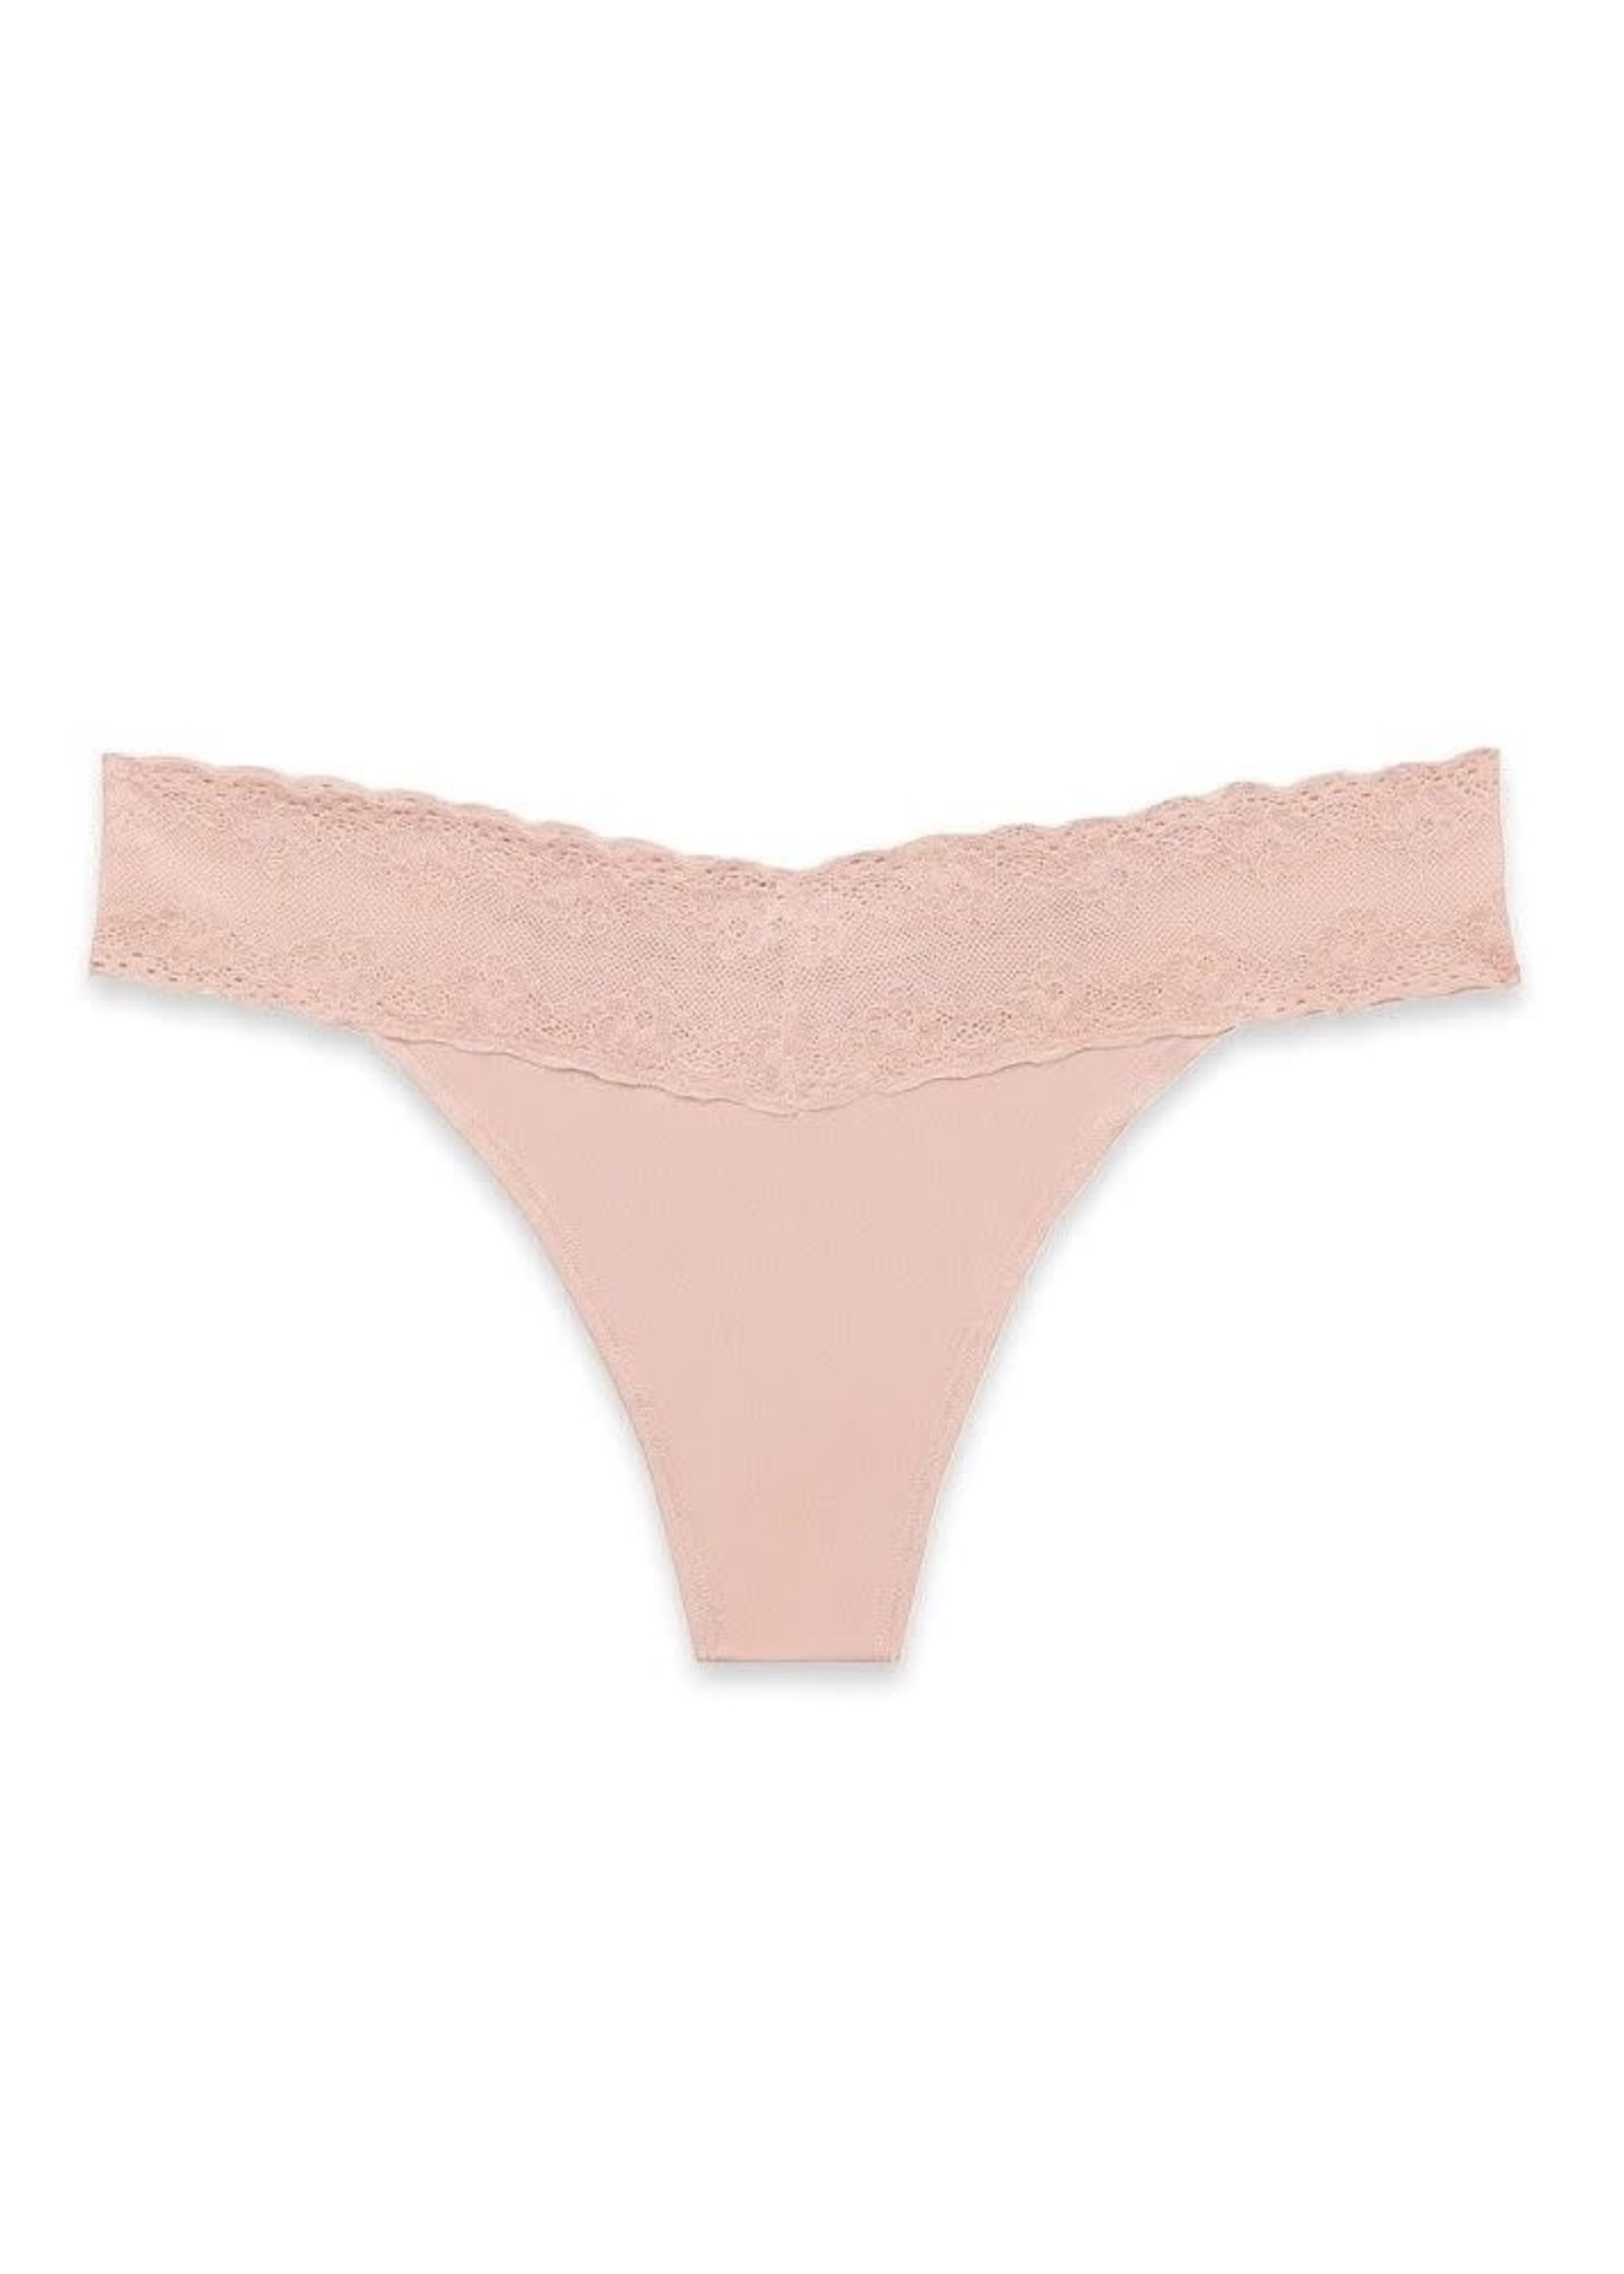 Natori Bliss Perfection One-Size Thong - Rose Beige